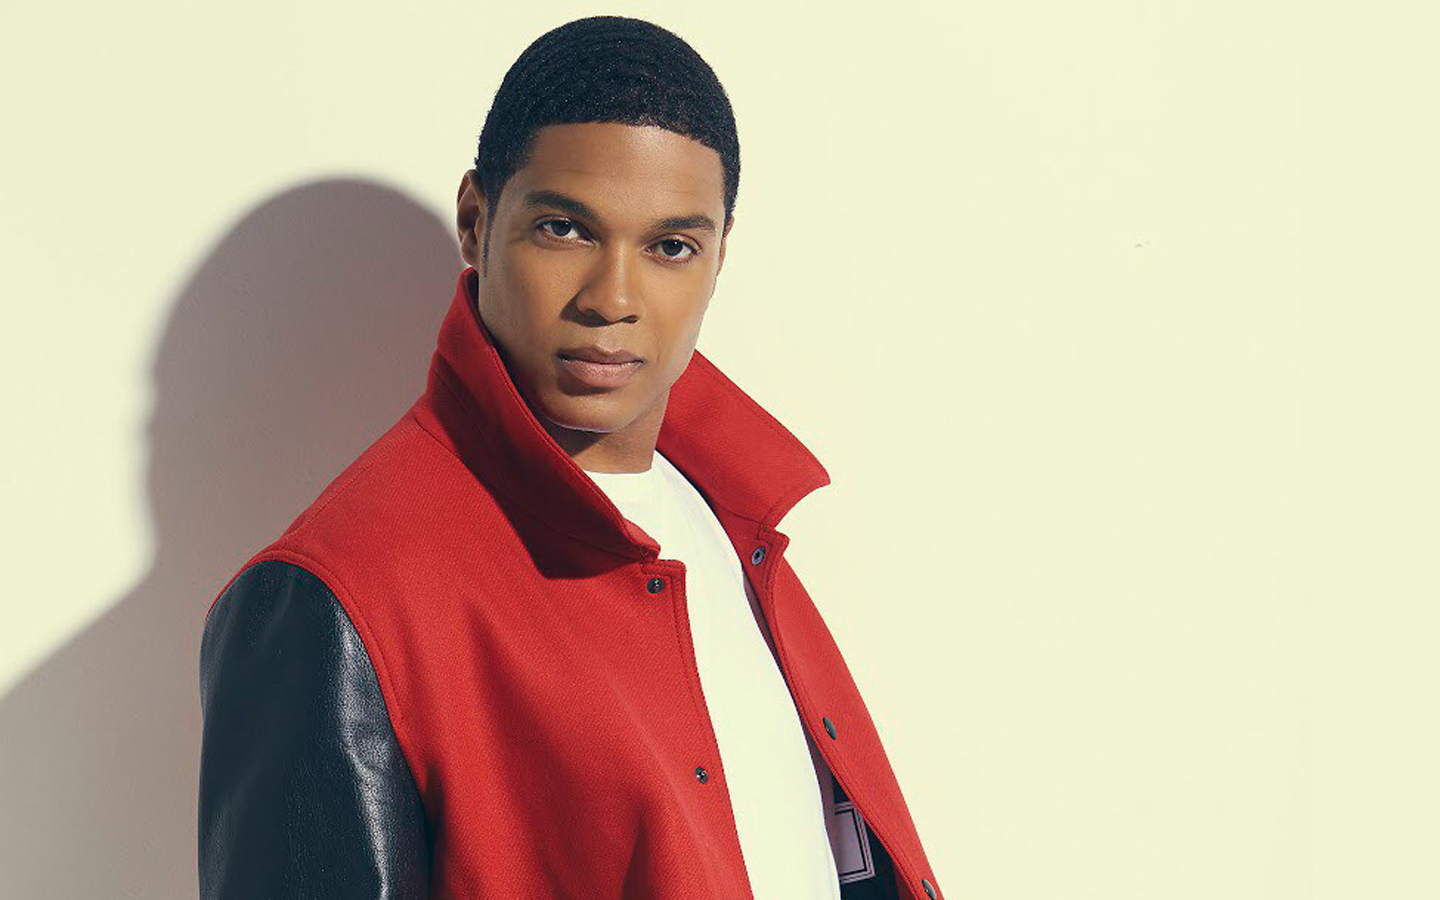 Interview: Ray Fisher Talks ‘ZSJL’, Working With Karen Bryson, ‘Women of the Movement’ & More